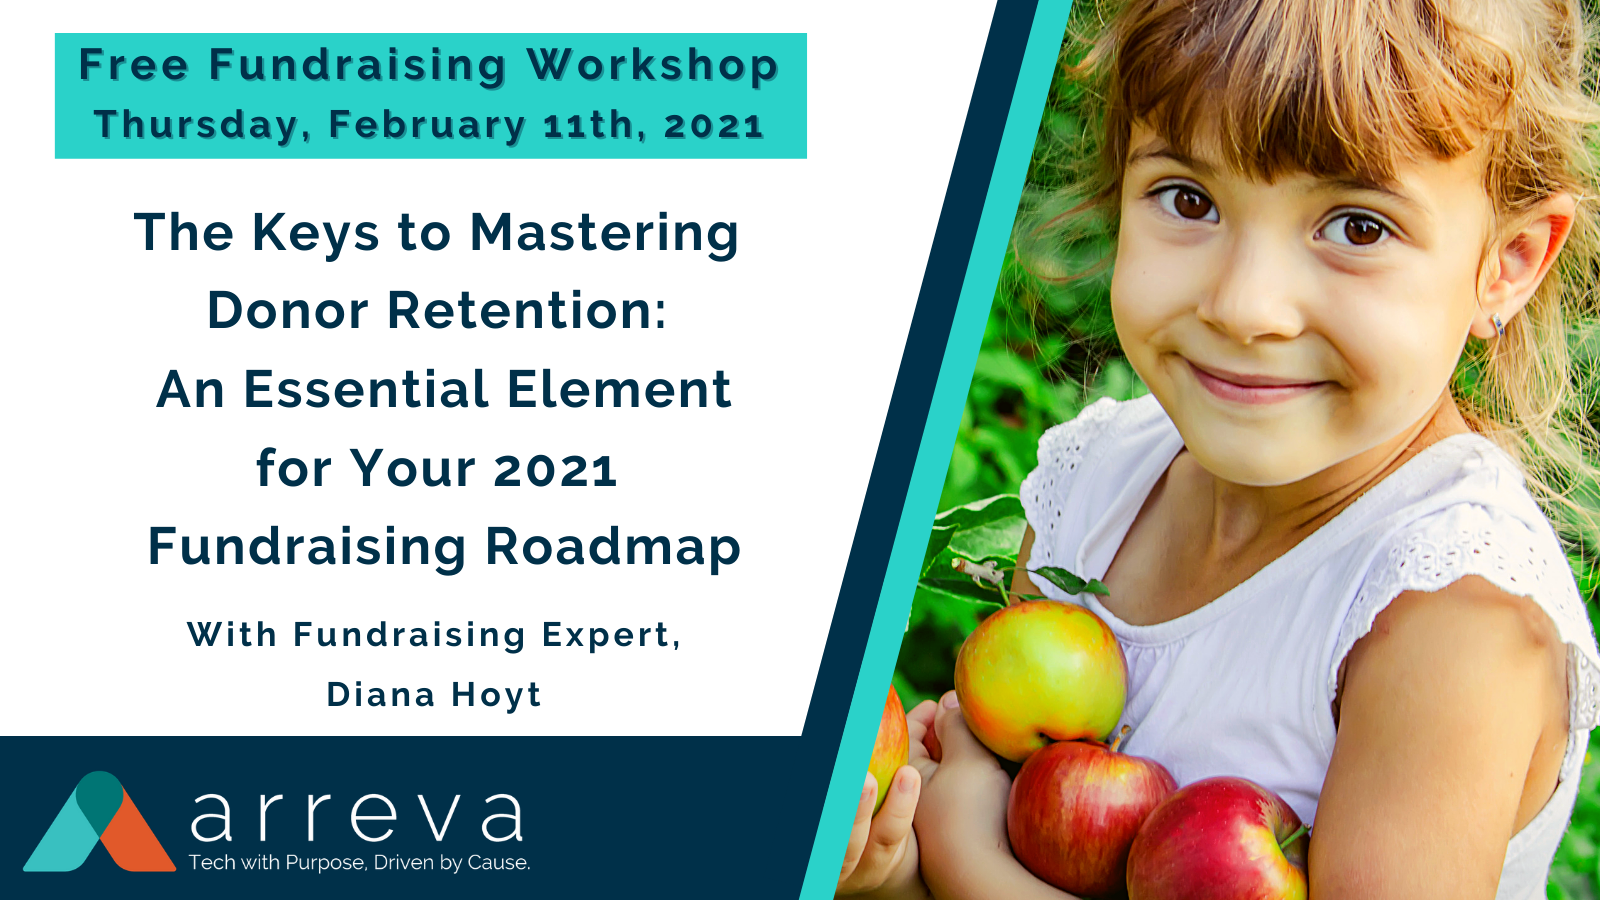 Free Fundraising Workshop: The Keys to Mastering Donor Retention